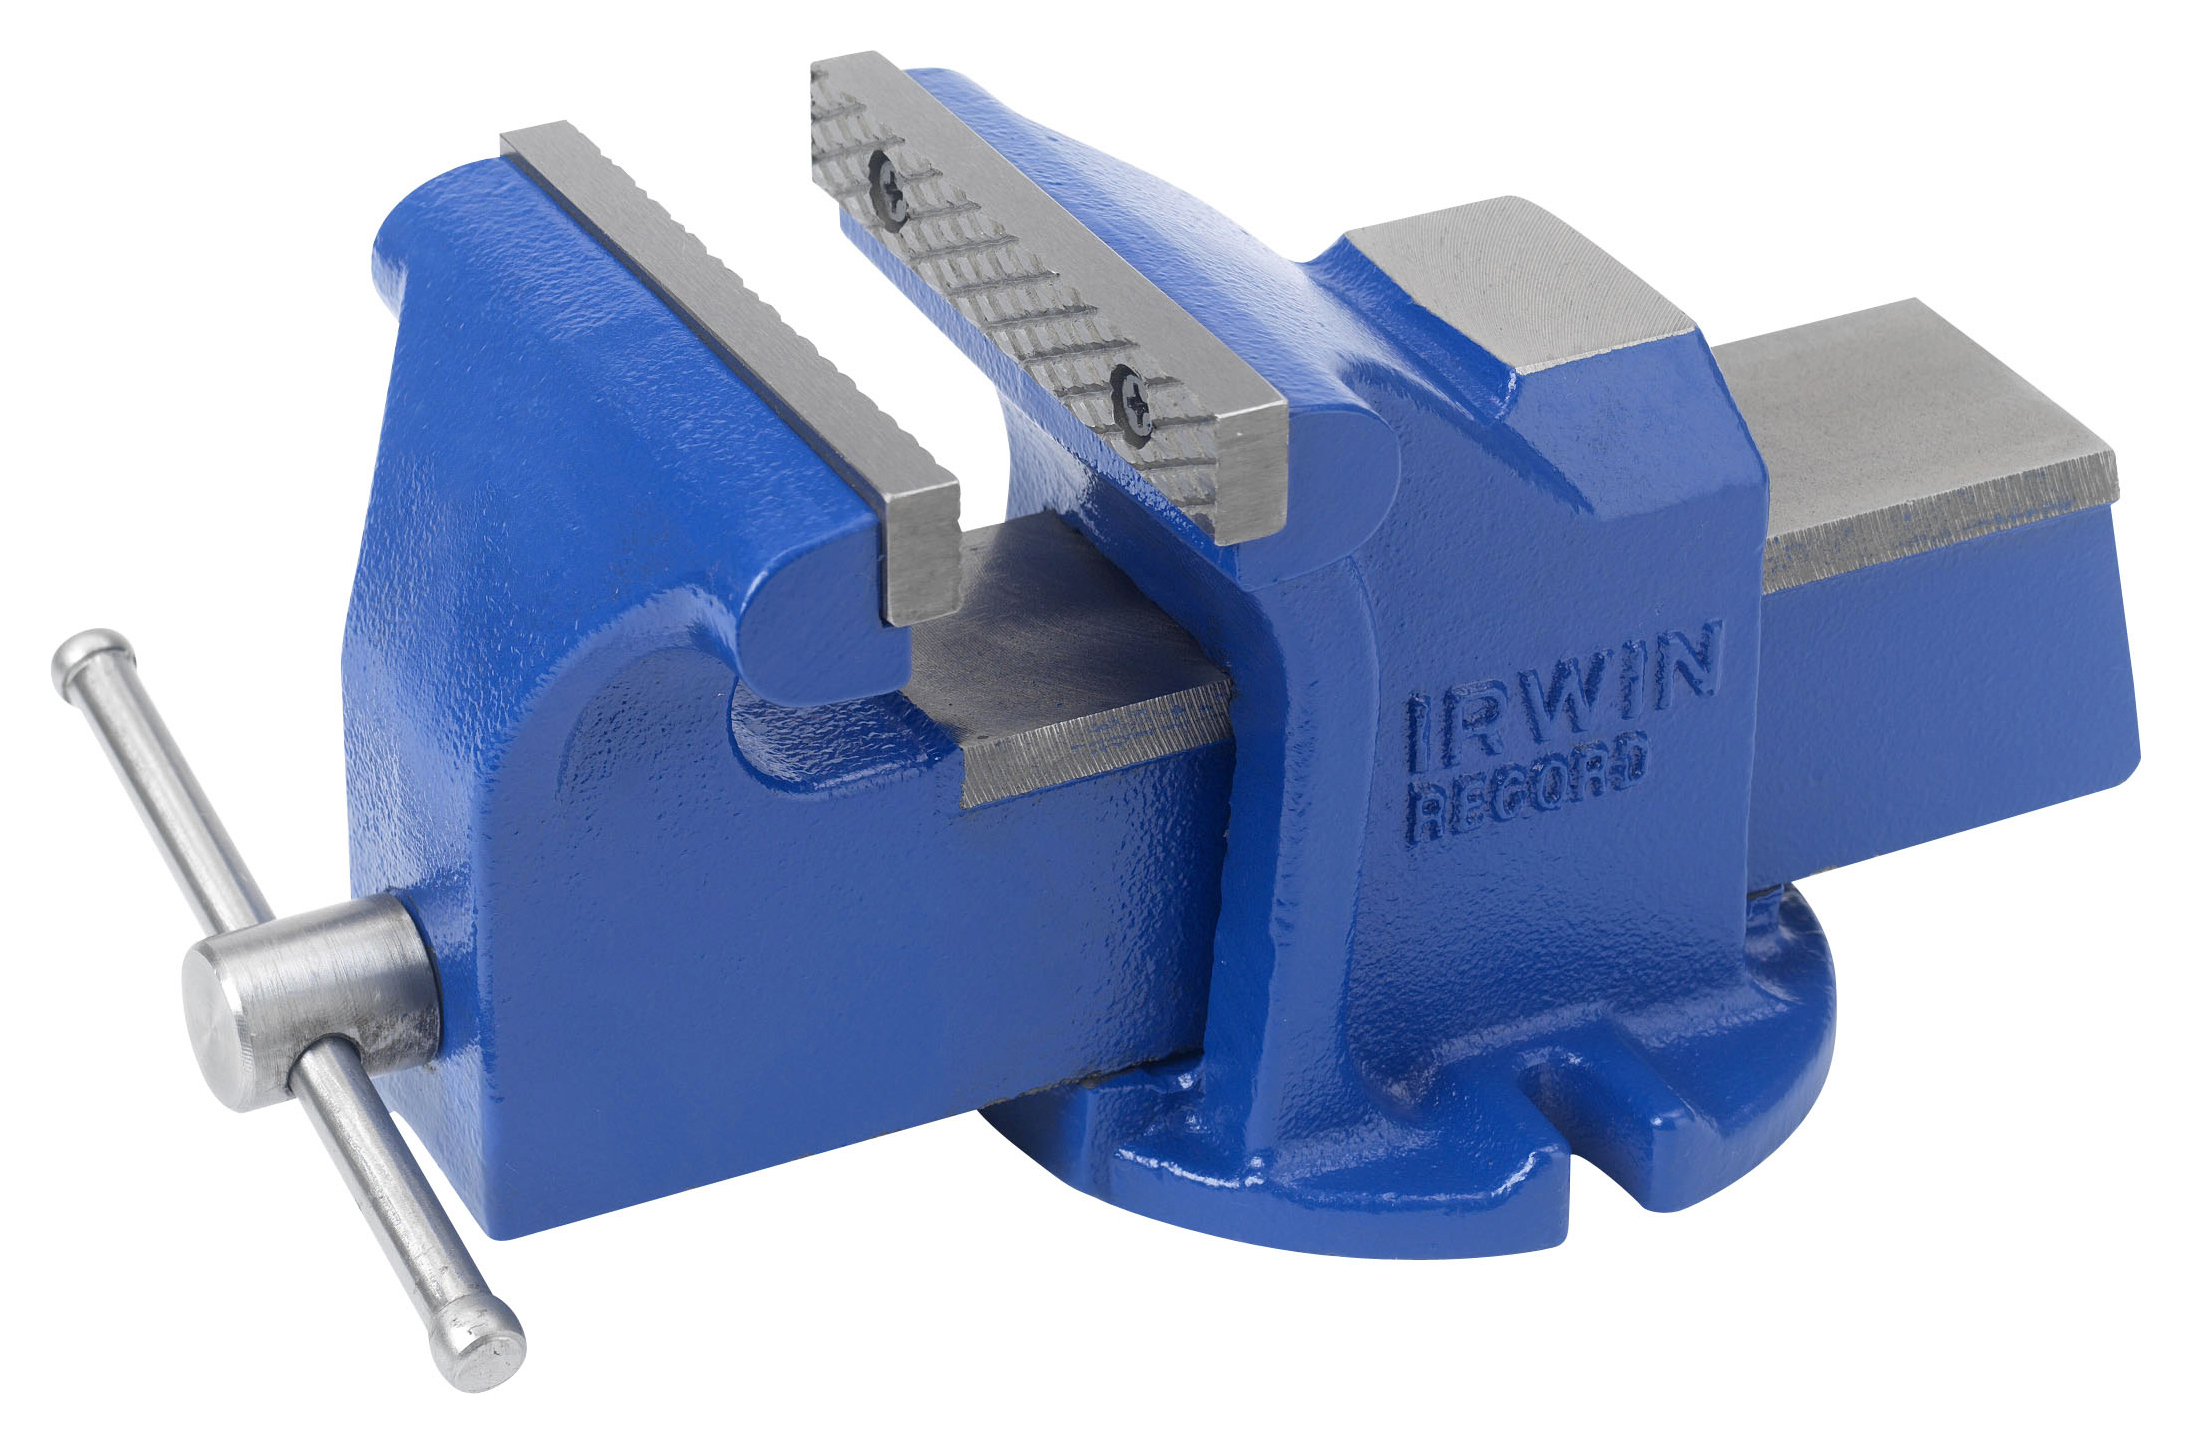 Image of Irwin 10507771 Workshop Vice with Anvil - 80mm